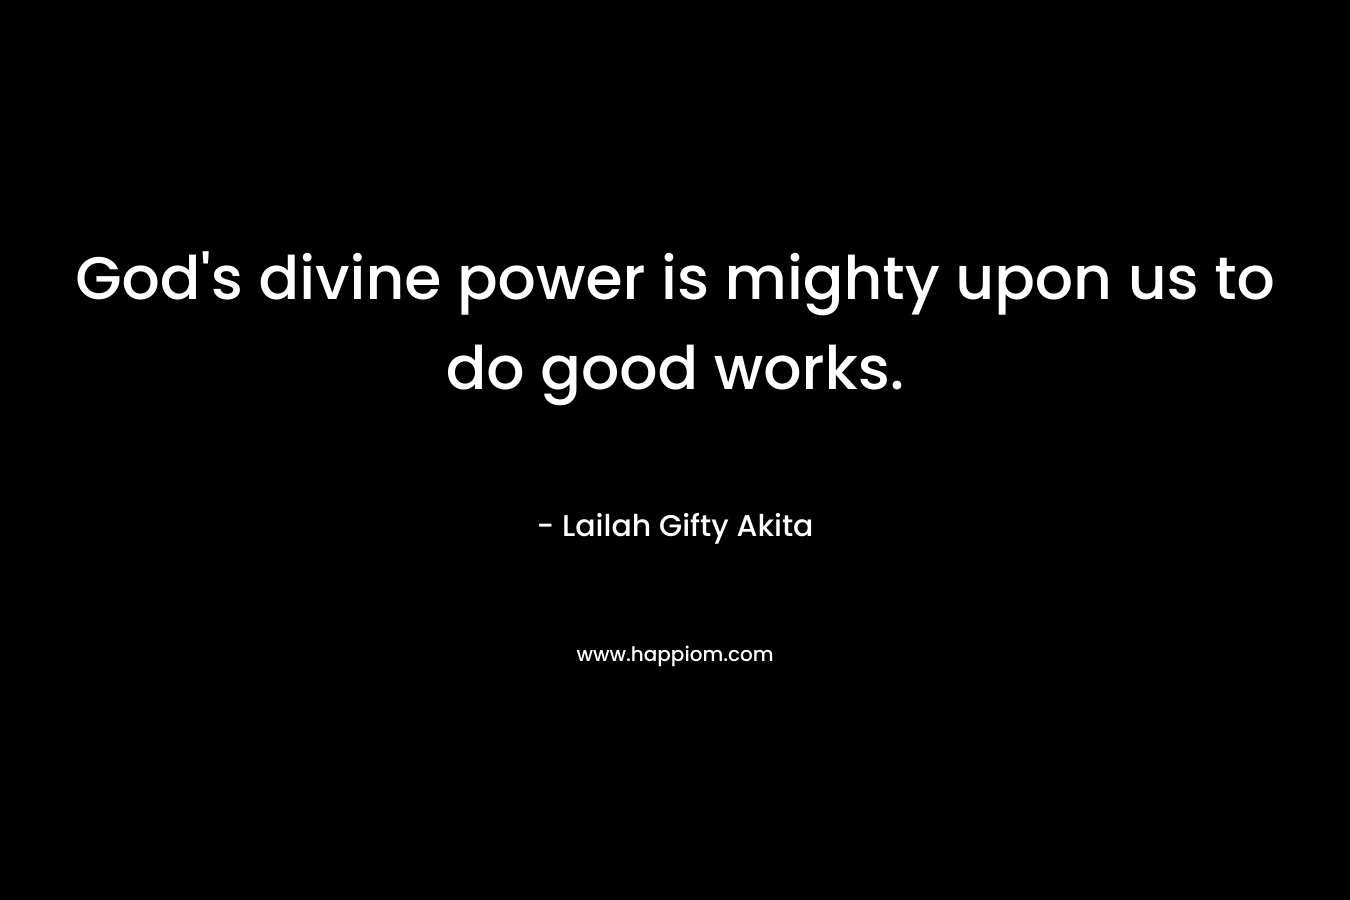 God's divine power is mighty upon us to do good works.